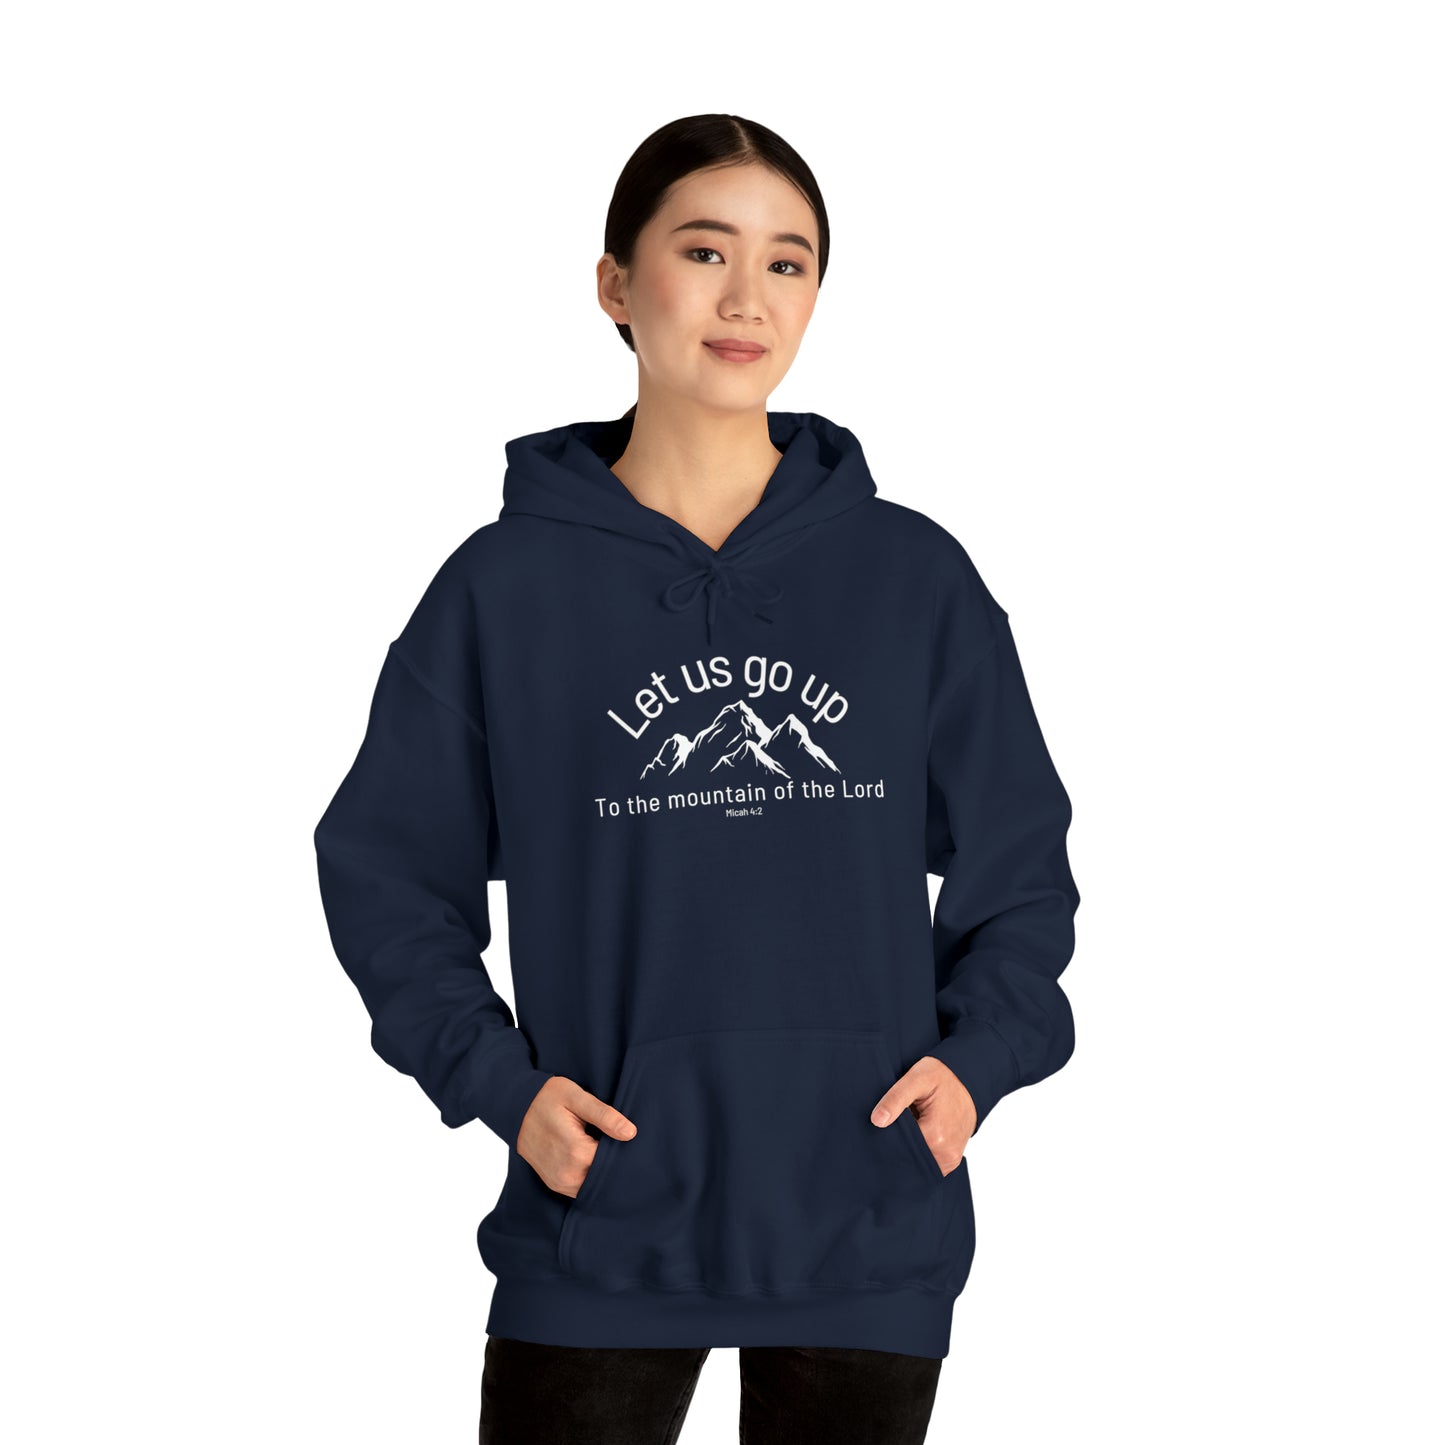 Micah 4:2, Heavy Blend™ Christian Hoodie for Men and Women